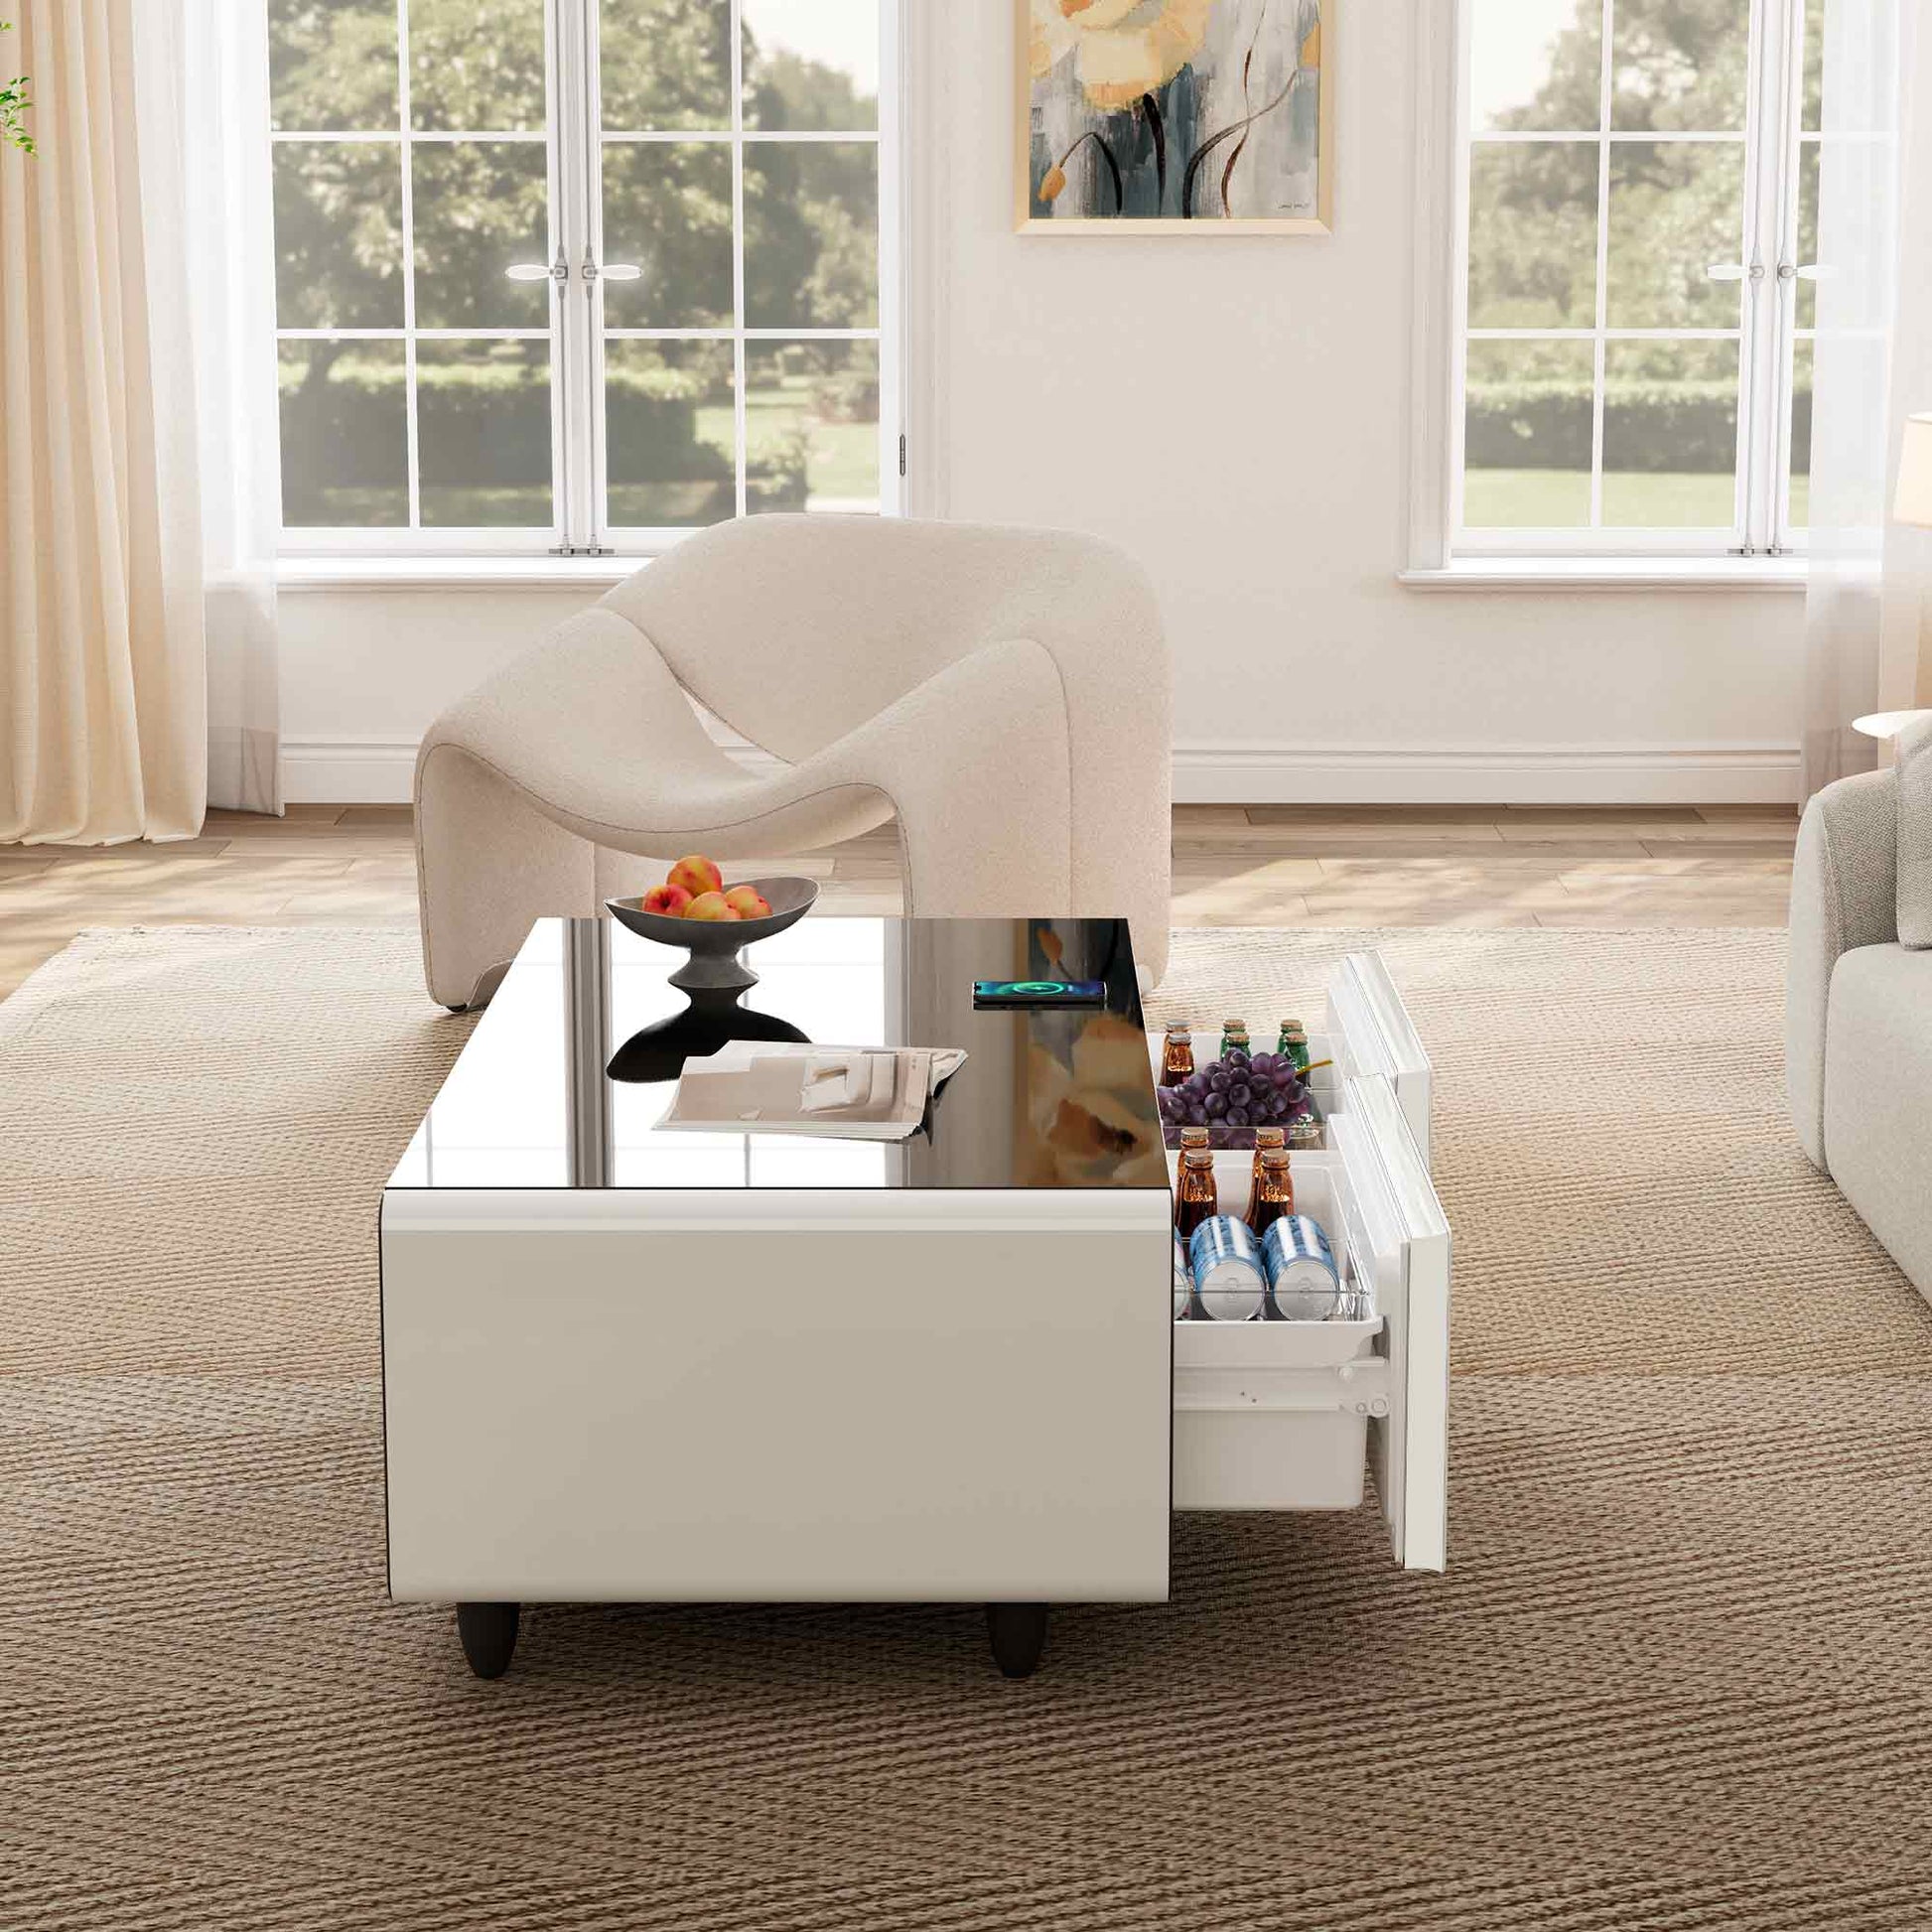 50 inch White Smart Fridge Coffee Table with Bluetooth Speakers, Lifestyle Product Image with Drawers Open